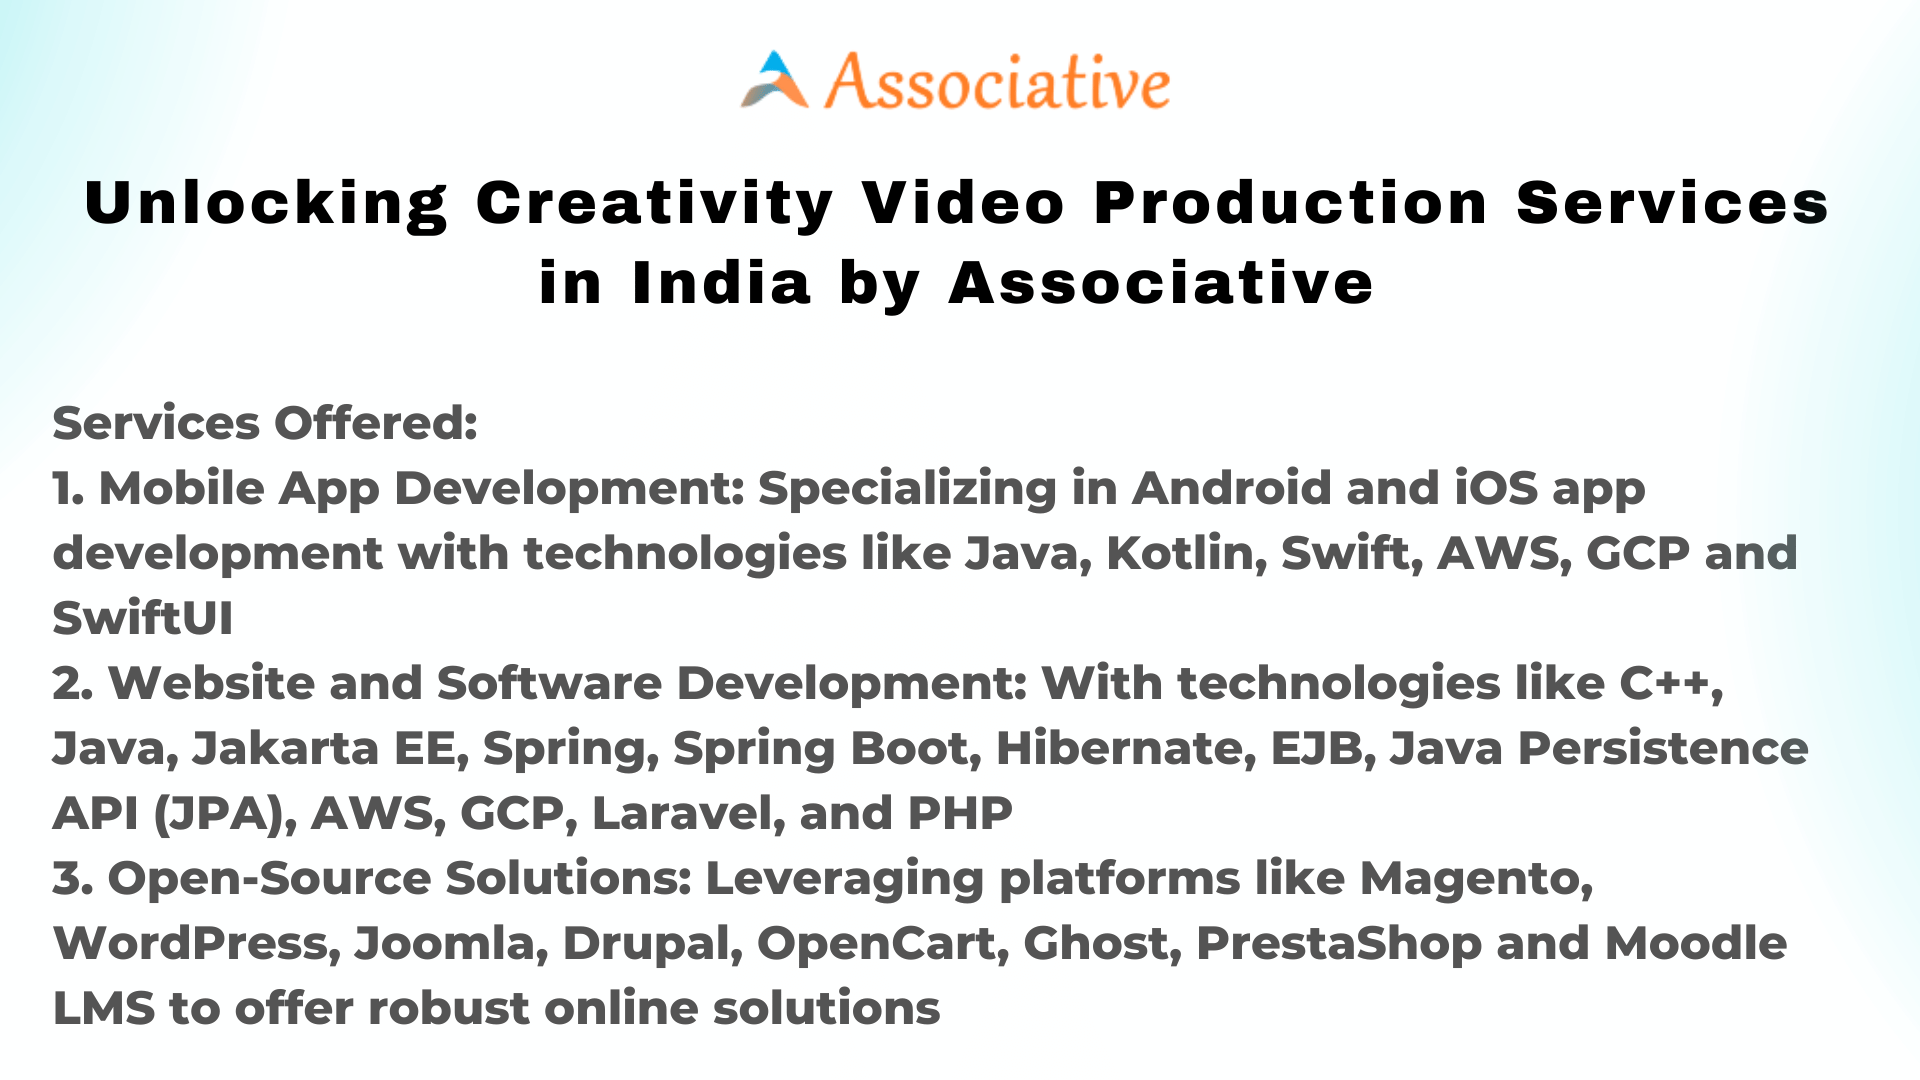 Unlocking Creativity Video Production Services in India by Associative